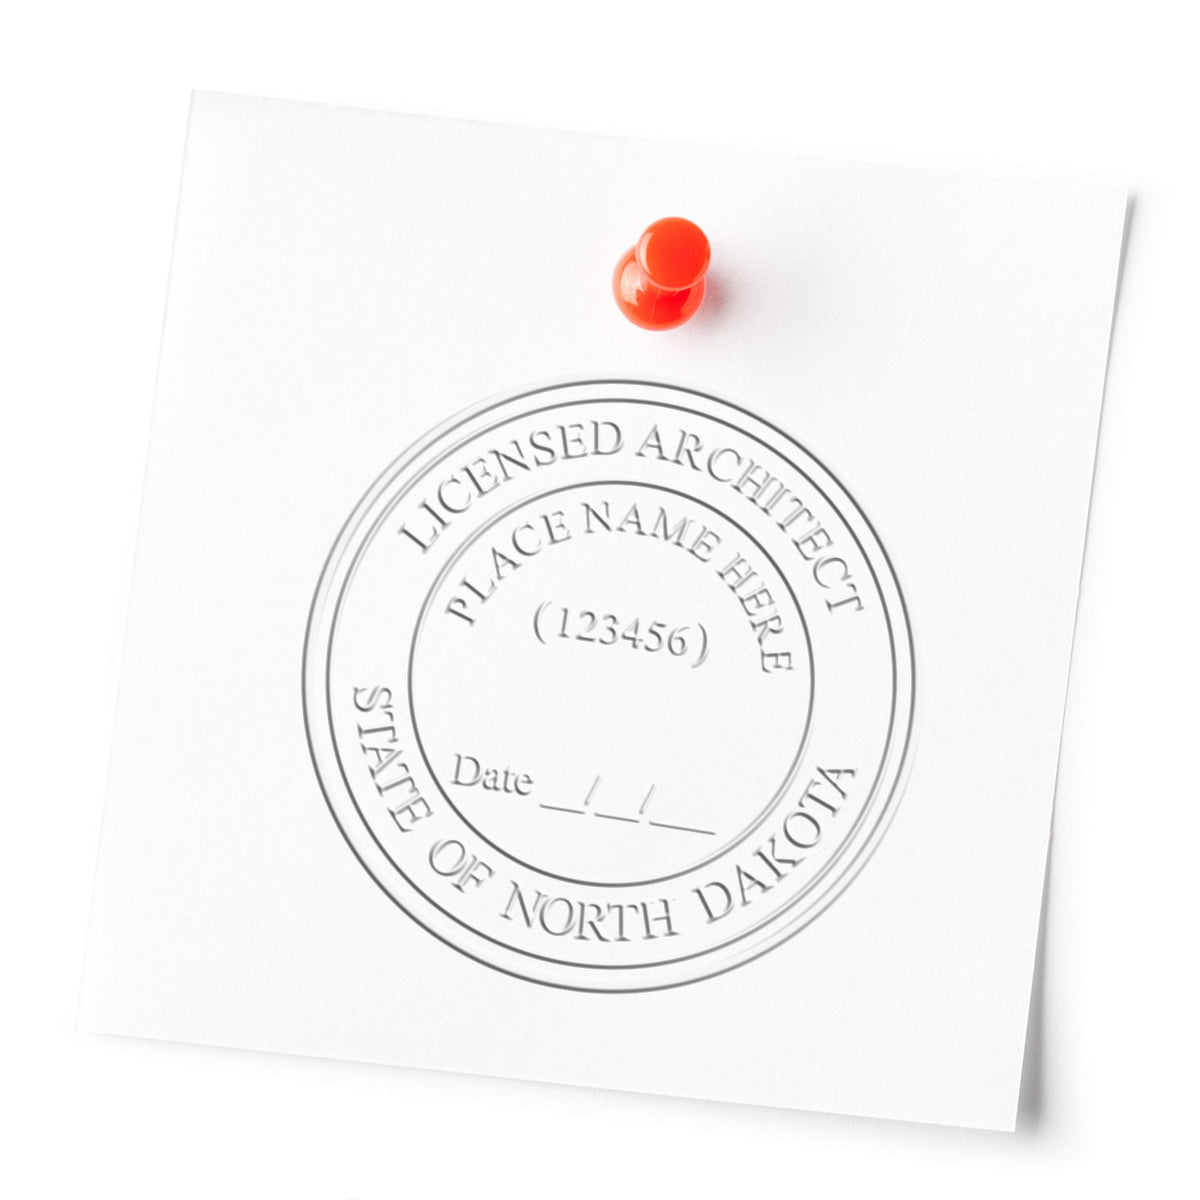 An in use photo of the Gift North Dakota Architect Seal showing a sample imprint on a cardstock